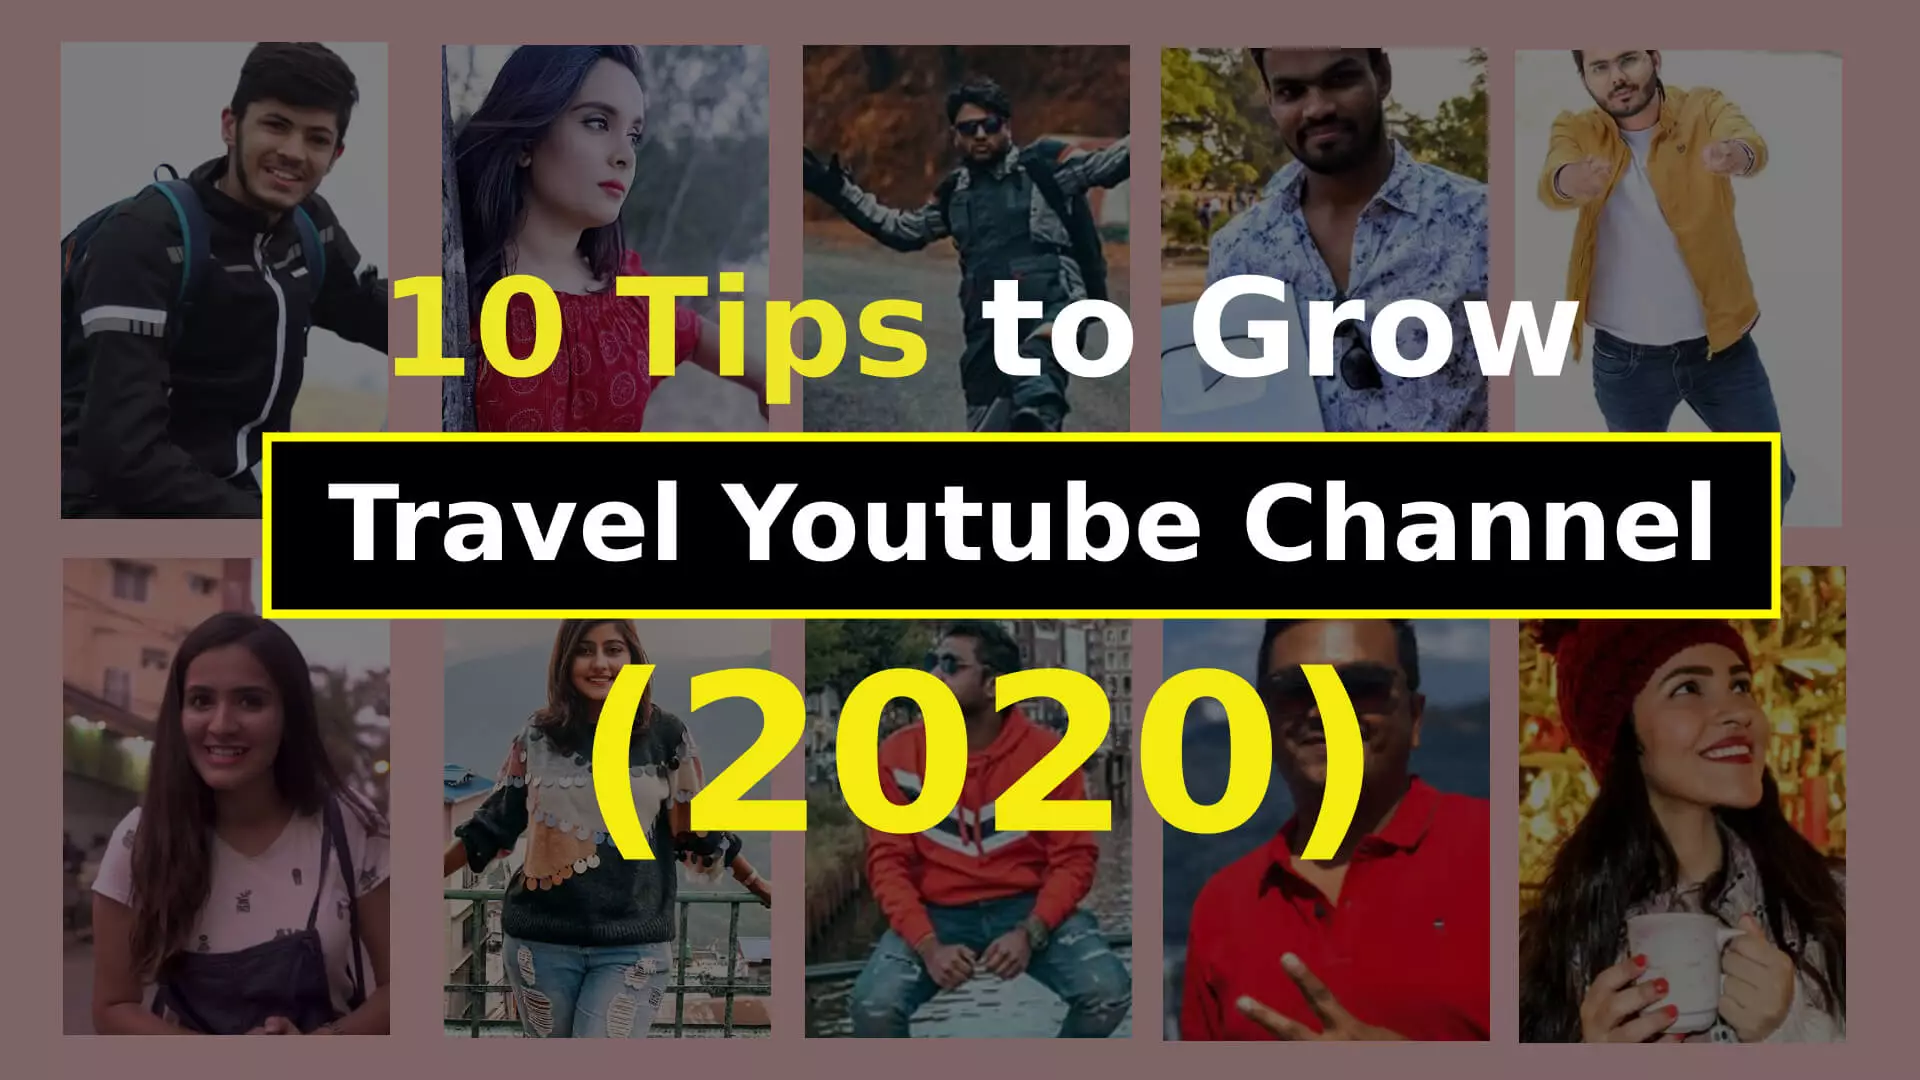 How to grow travel YouTube Channel